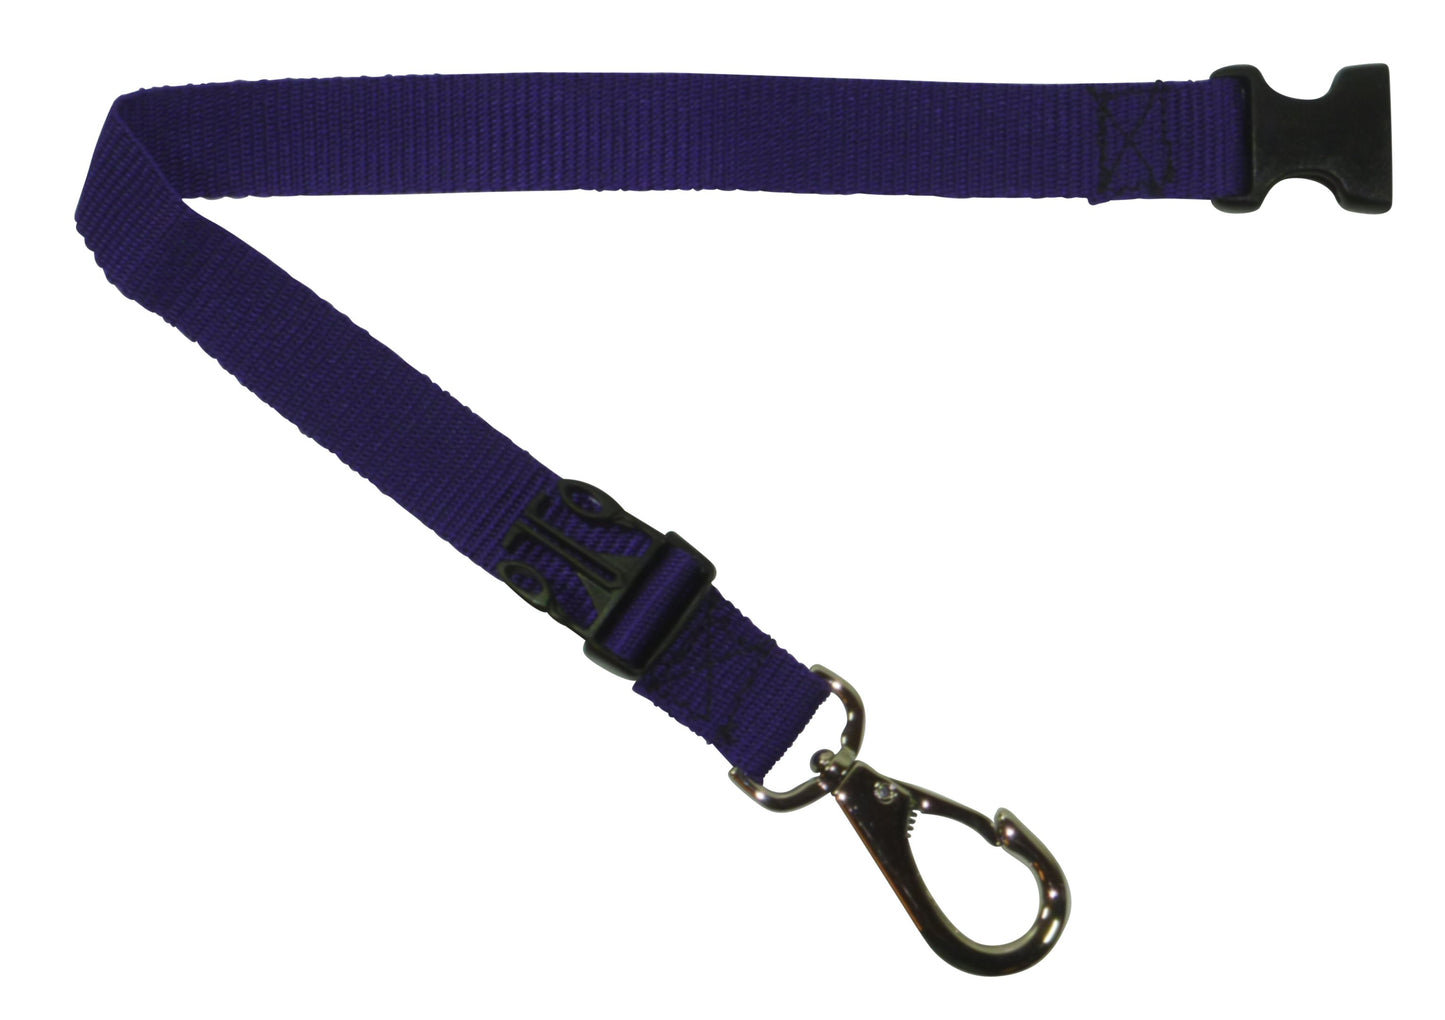 Benristraps Bag Support Strap, Pack of 2 Straps in purple